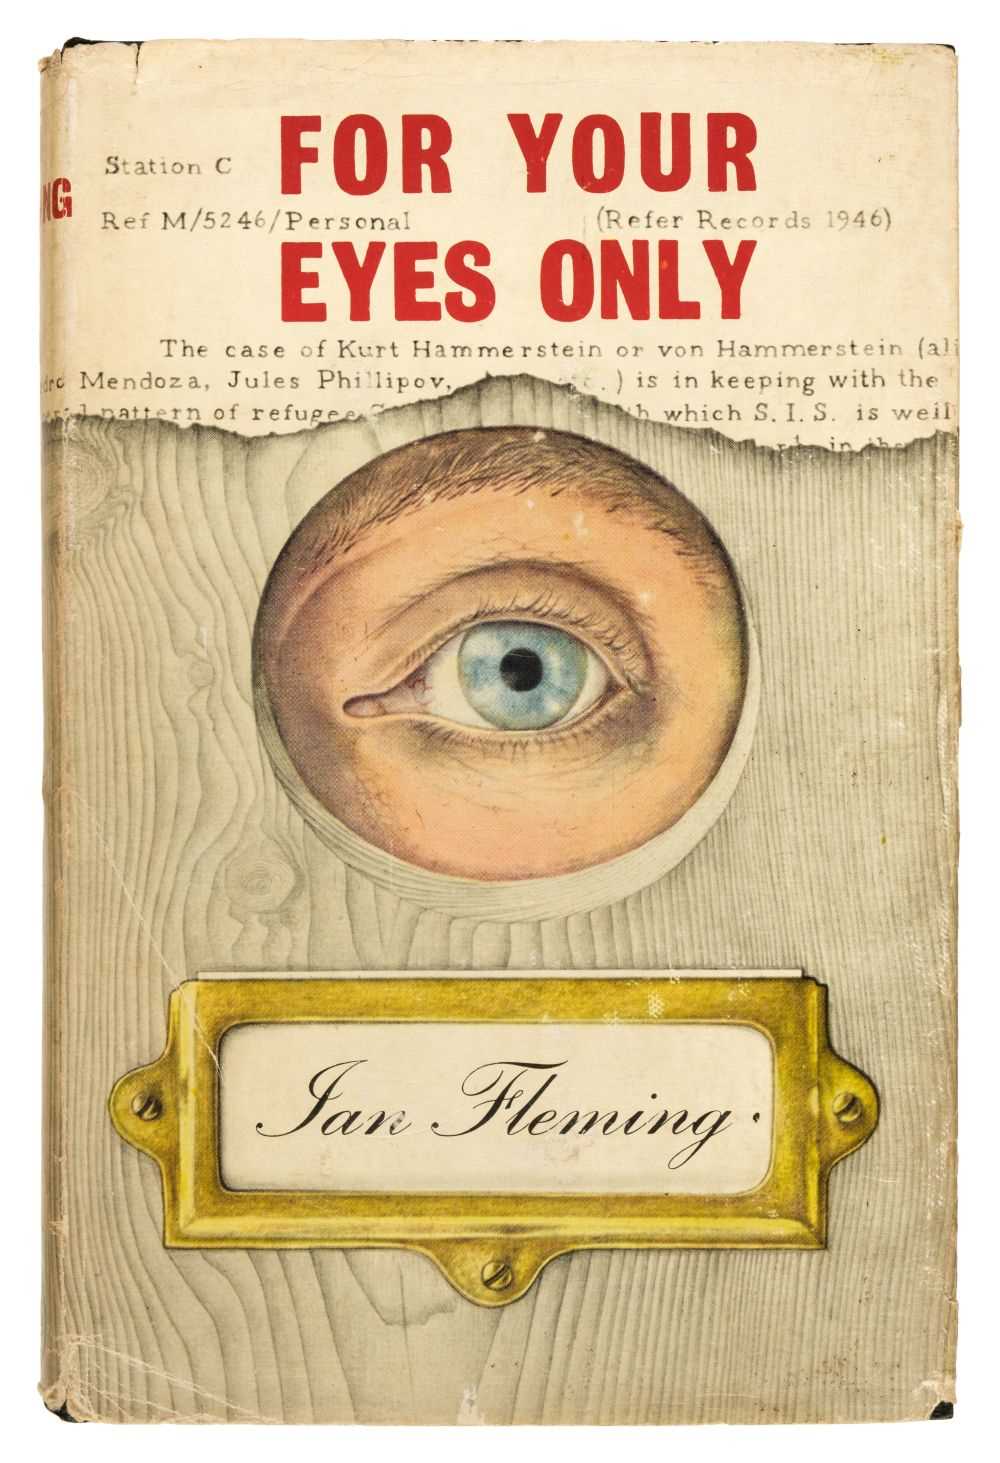 Lot 819 - Fleming (Ian). For Your Eyes Only, 1st edition, 1960